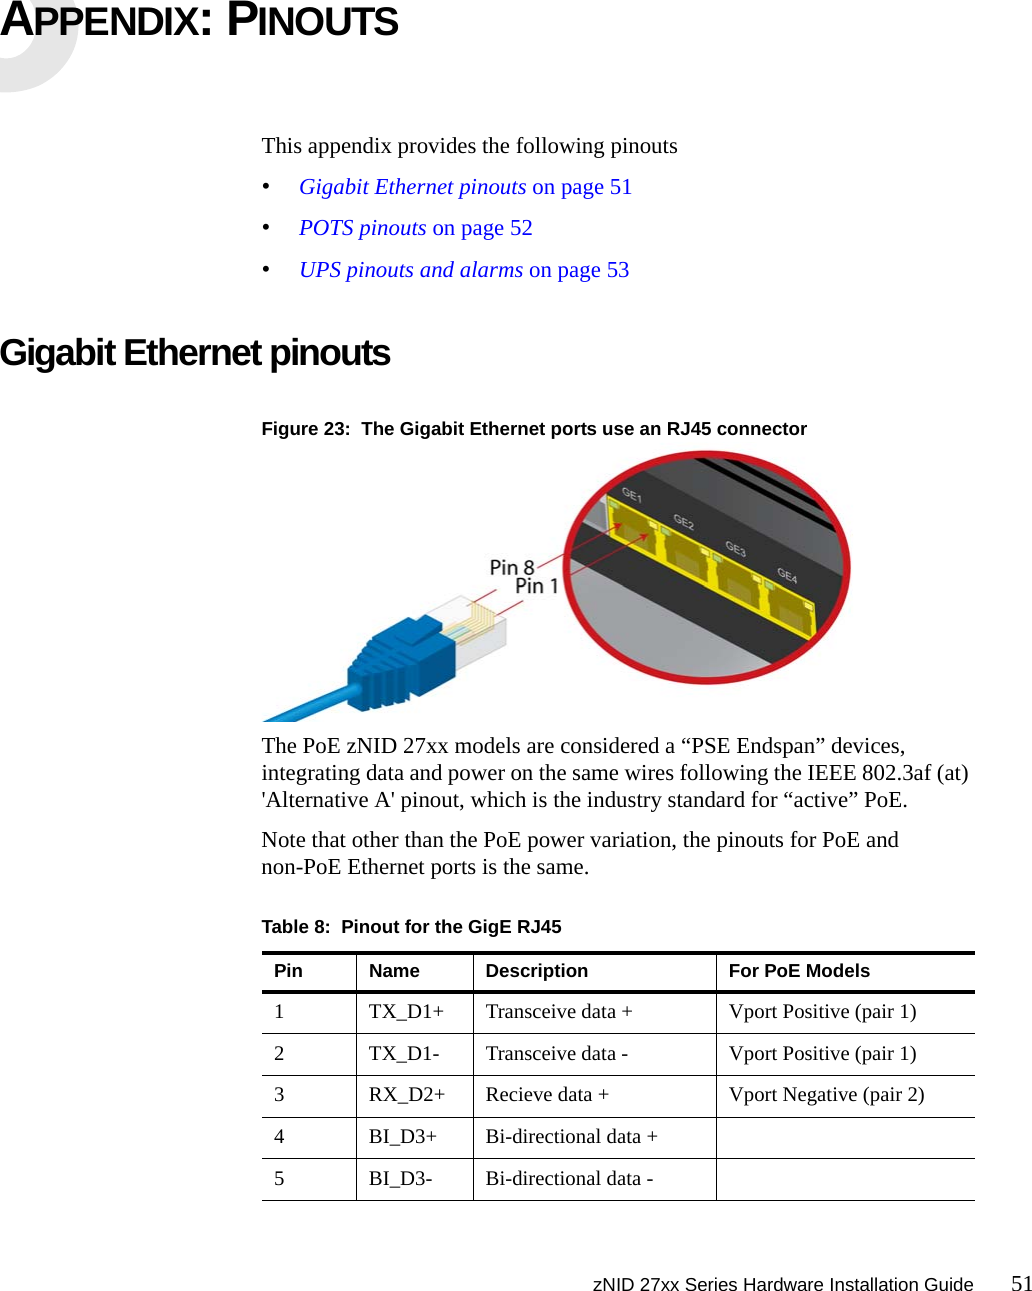 zNID 27xx Series Hardware Installation Guide 51APPENDIX: PINOUTSThis appendix provides the following pinouts•Gigabit Ethernet pinouts on page 51•POTS pinouts on page 52•UPS pinouts and alarms on page 53Gigabit Ethernet pinoutsFigure 23:  The Gigabit Ethernet ports use an RJ45 connectorThe PoE zNID 27xx models are considered a “PSE Endspan” devices, integrating data and power on the same wires following the IEEE 802.3af (at) &apos;Alternative A&apos; pinout, which is the industry standard for “active” PoE.Note that other than the PoE power variation, the pinouts for PoE and non-PoE Ethernet ports is the same.Table 8:  Pinout for the GigE RJ45Pin Name Description For PoE Models1 TX_D1+ Transceive data + Vport Positive (pair 1)2 TX_D1- Transceive data - Vport Positive (pair 1)3 RX_D2+ Recieve data + Vport Negative (pair 2)4 BI_D3+ Bi-directional data +5 BI_D3- Bi-directional data -